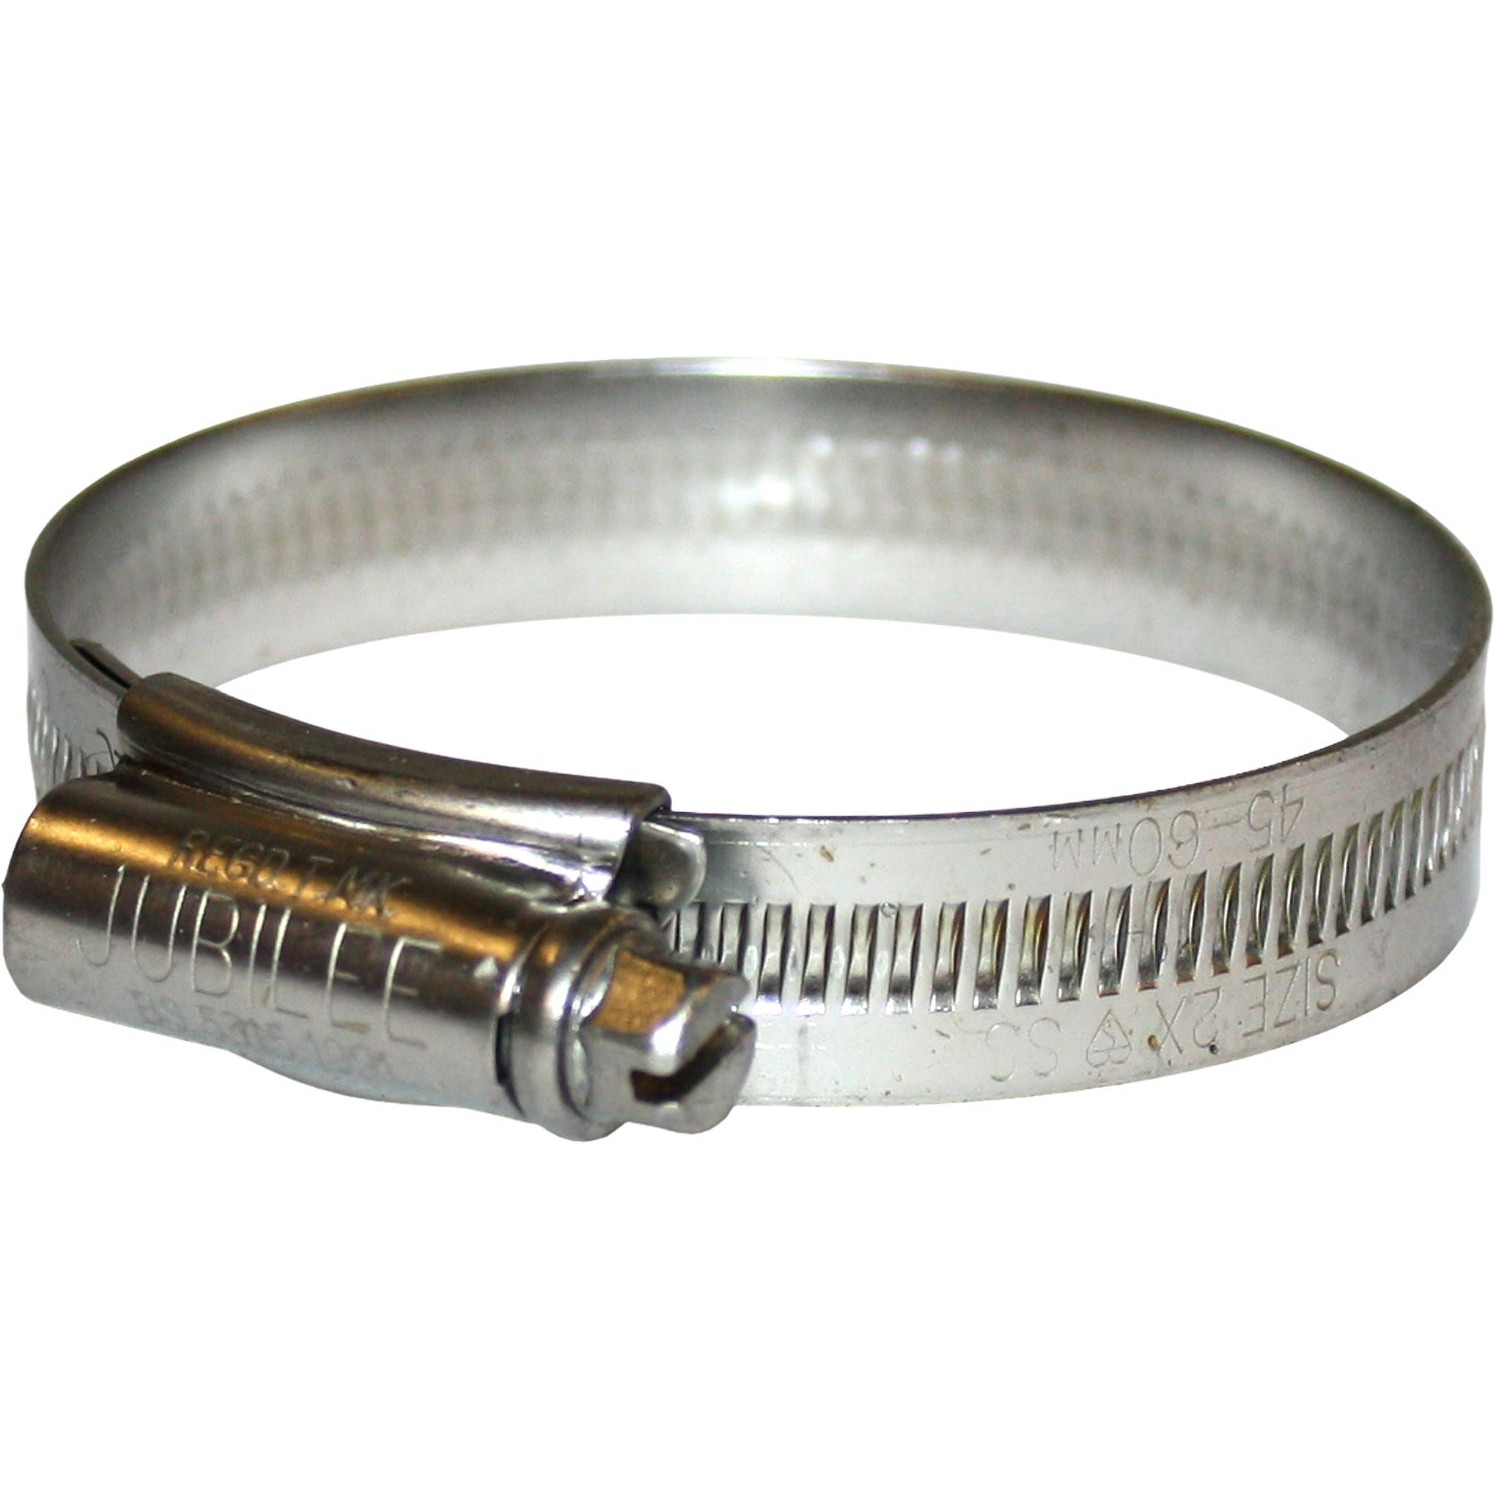 Stainless Steel Genuine Jubilee Hose Clamp Size 9.5mm-12mm Ref 000 Hose Clip